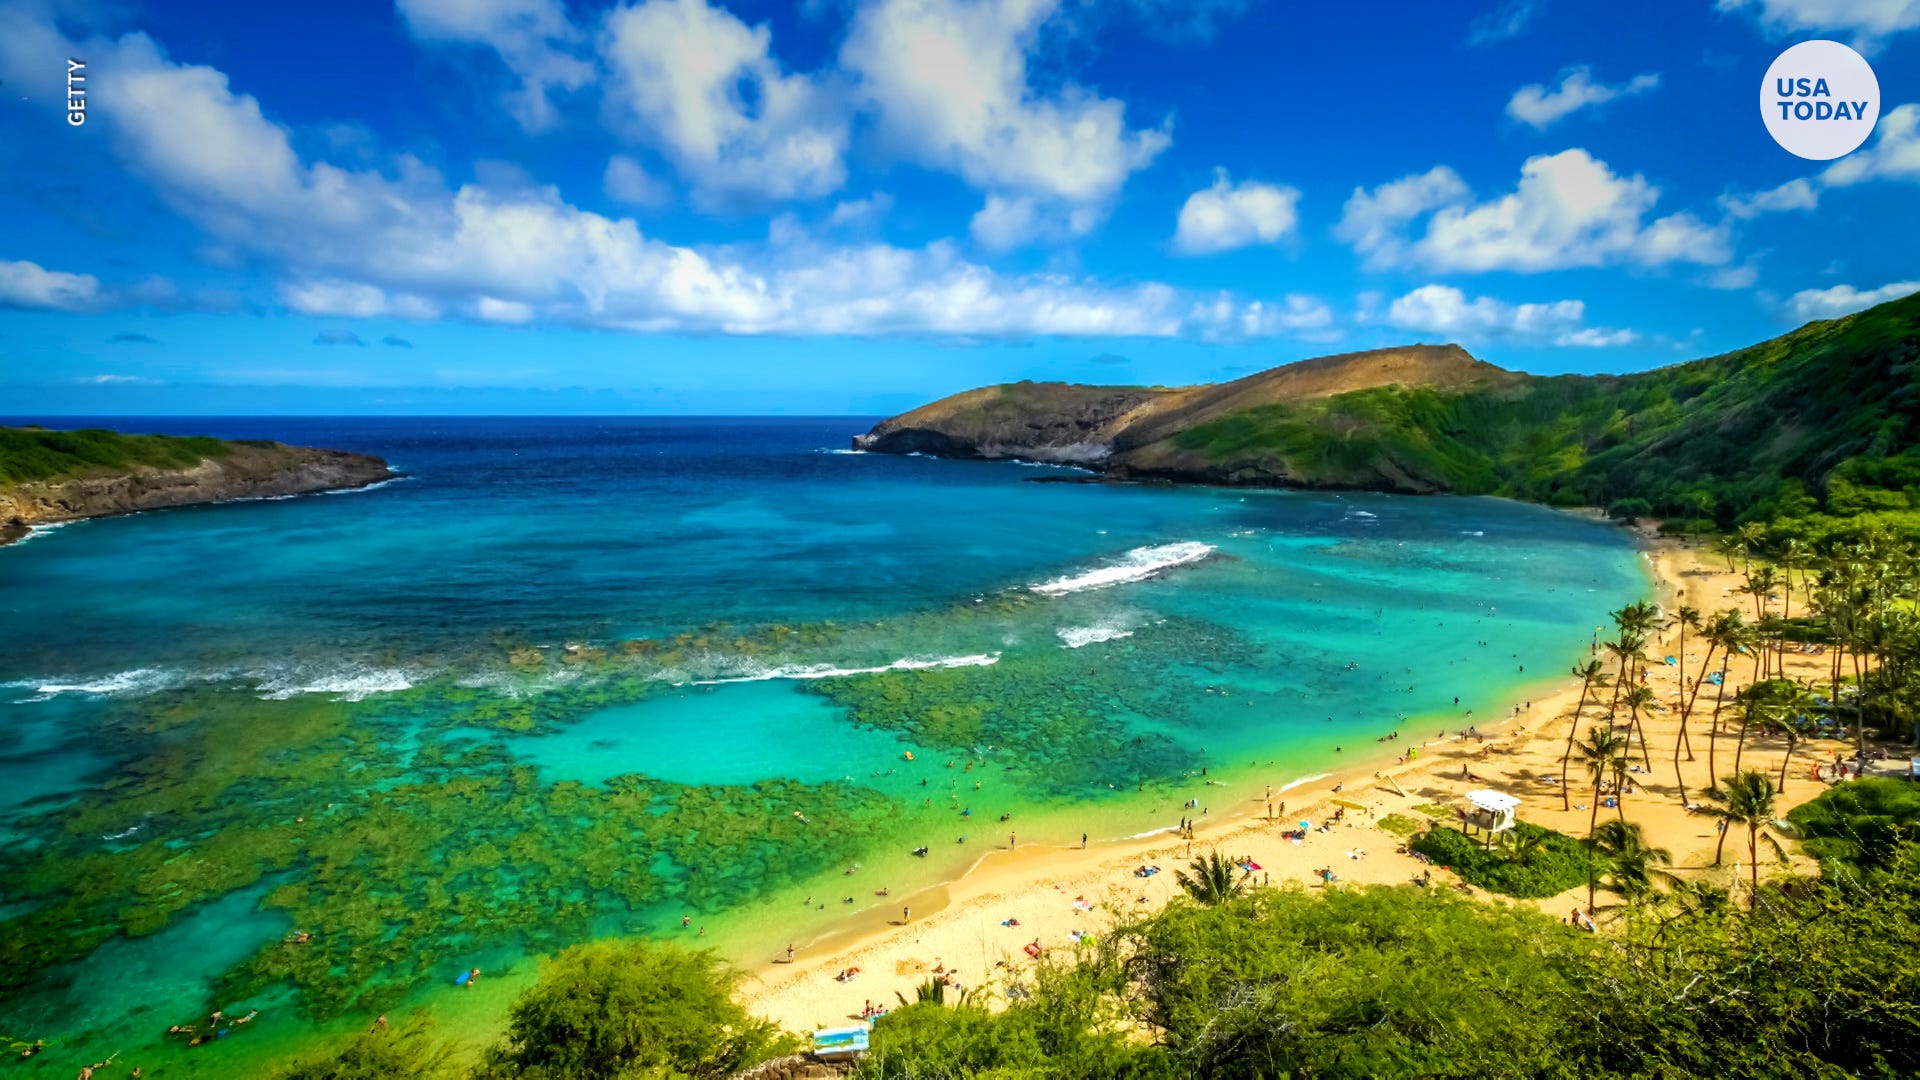 Hawaii Covid 19 Travel You Must Fill Out Forms On Safe Travel App